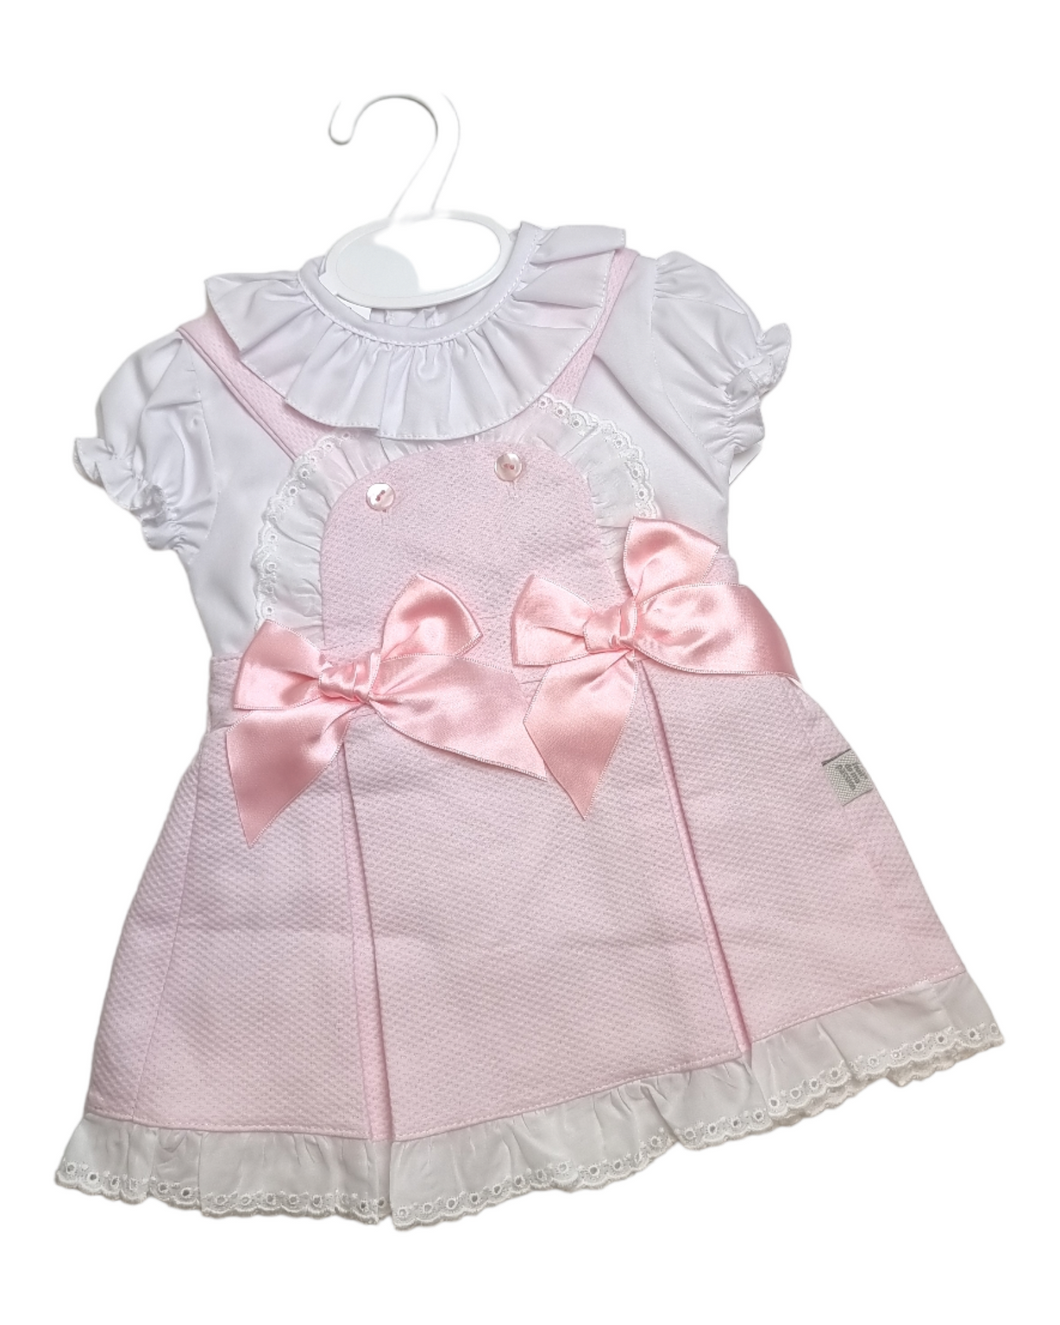 Pink baby girls outfit